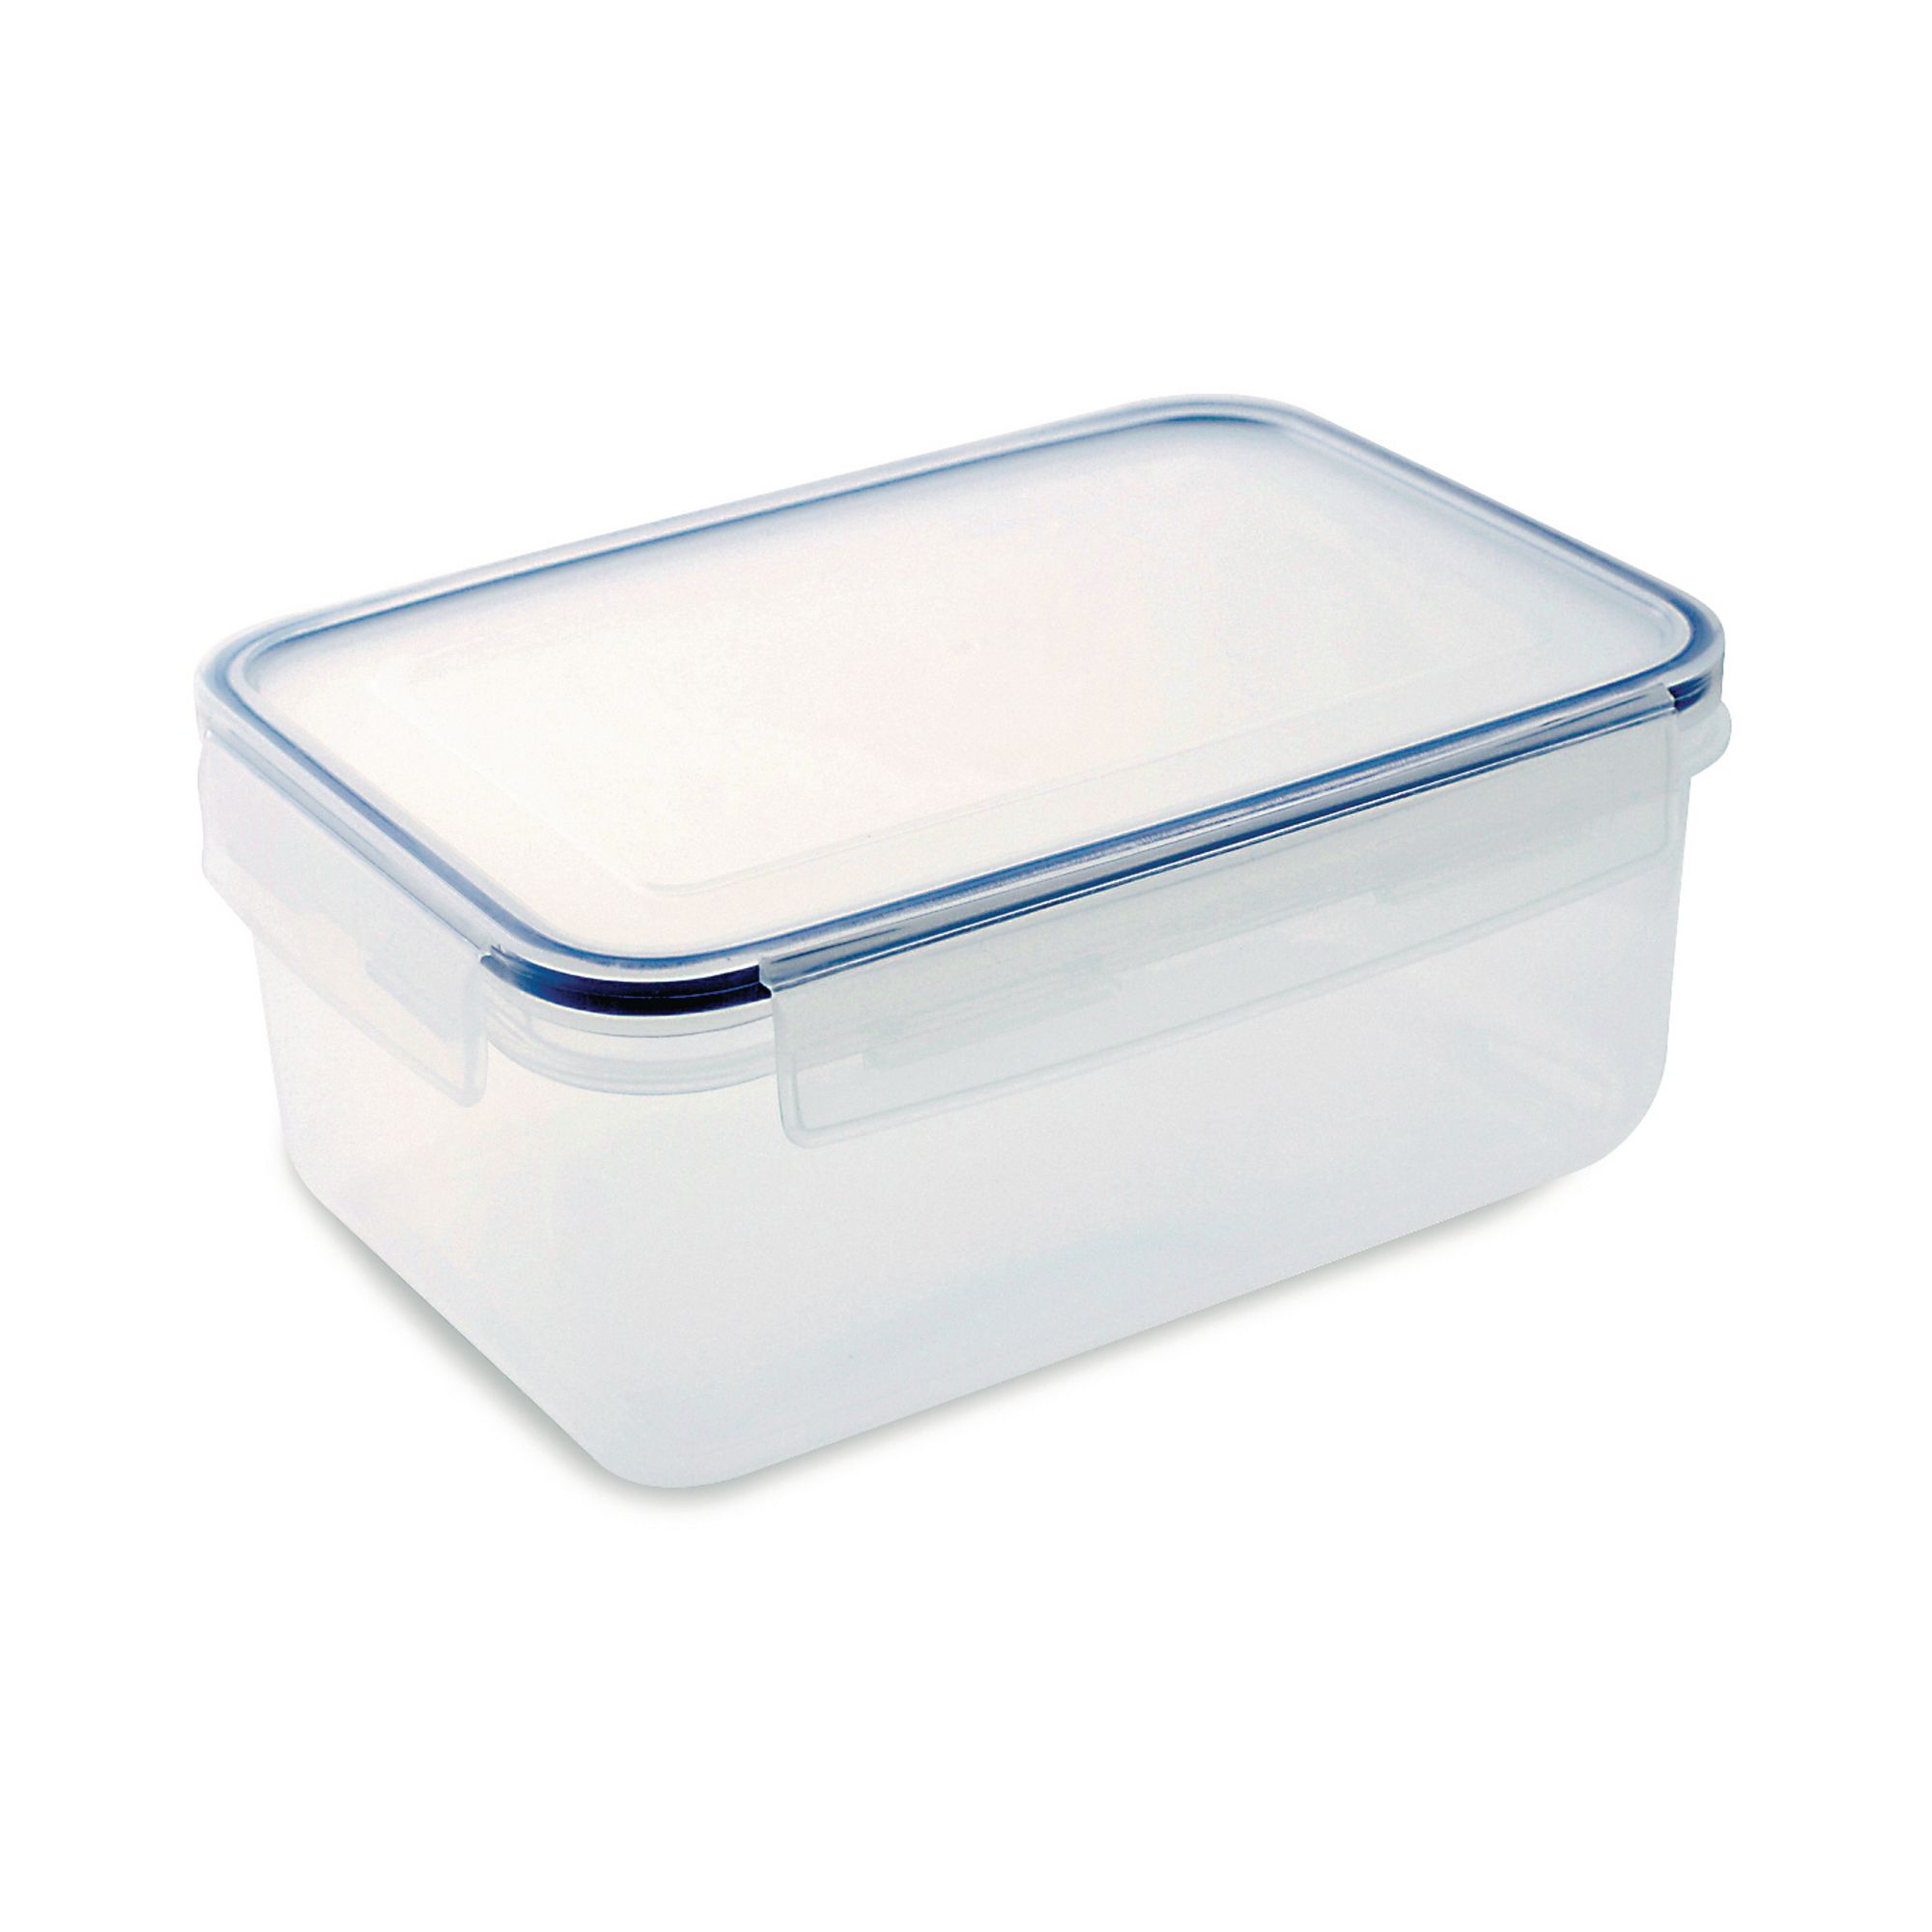 HE1494805 - Addis Clip and Close Food Storage Box - Clear - 2 Litre ...